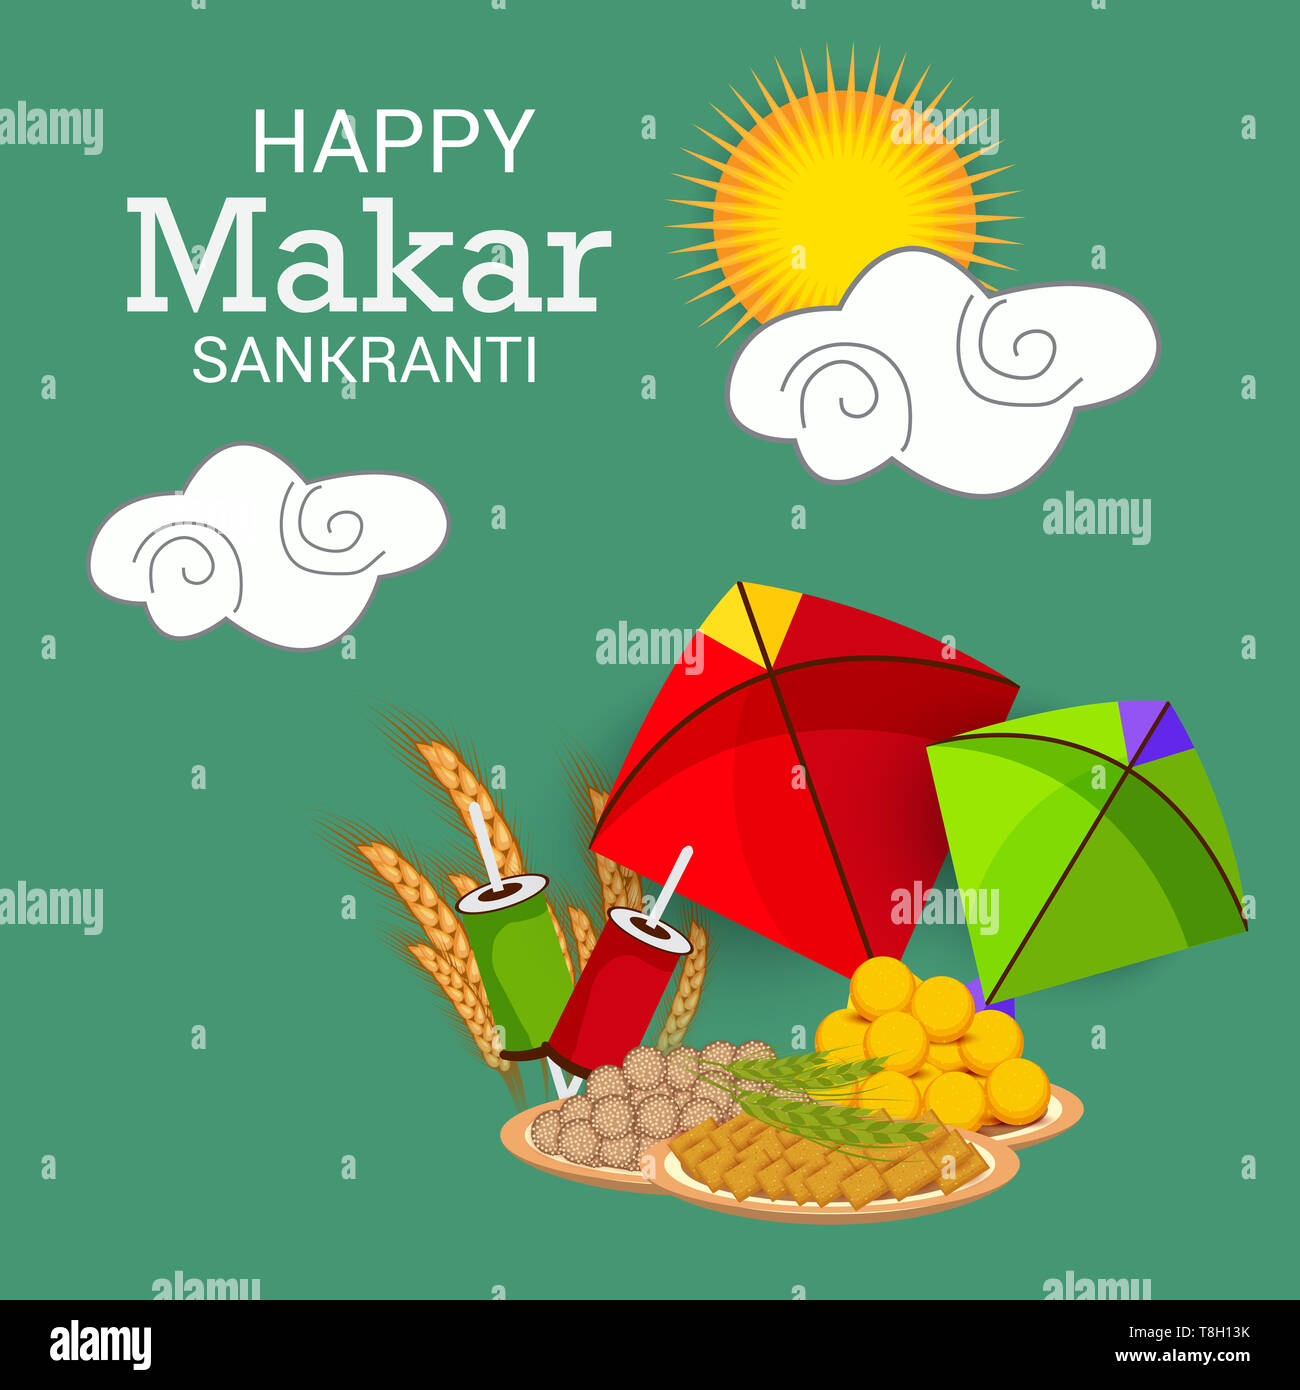 Vector illustration of a Background for Traditional Indian Festival  Celebrate Makar Sankranti with Colorful Kites Stock Photo - Alamy